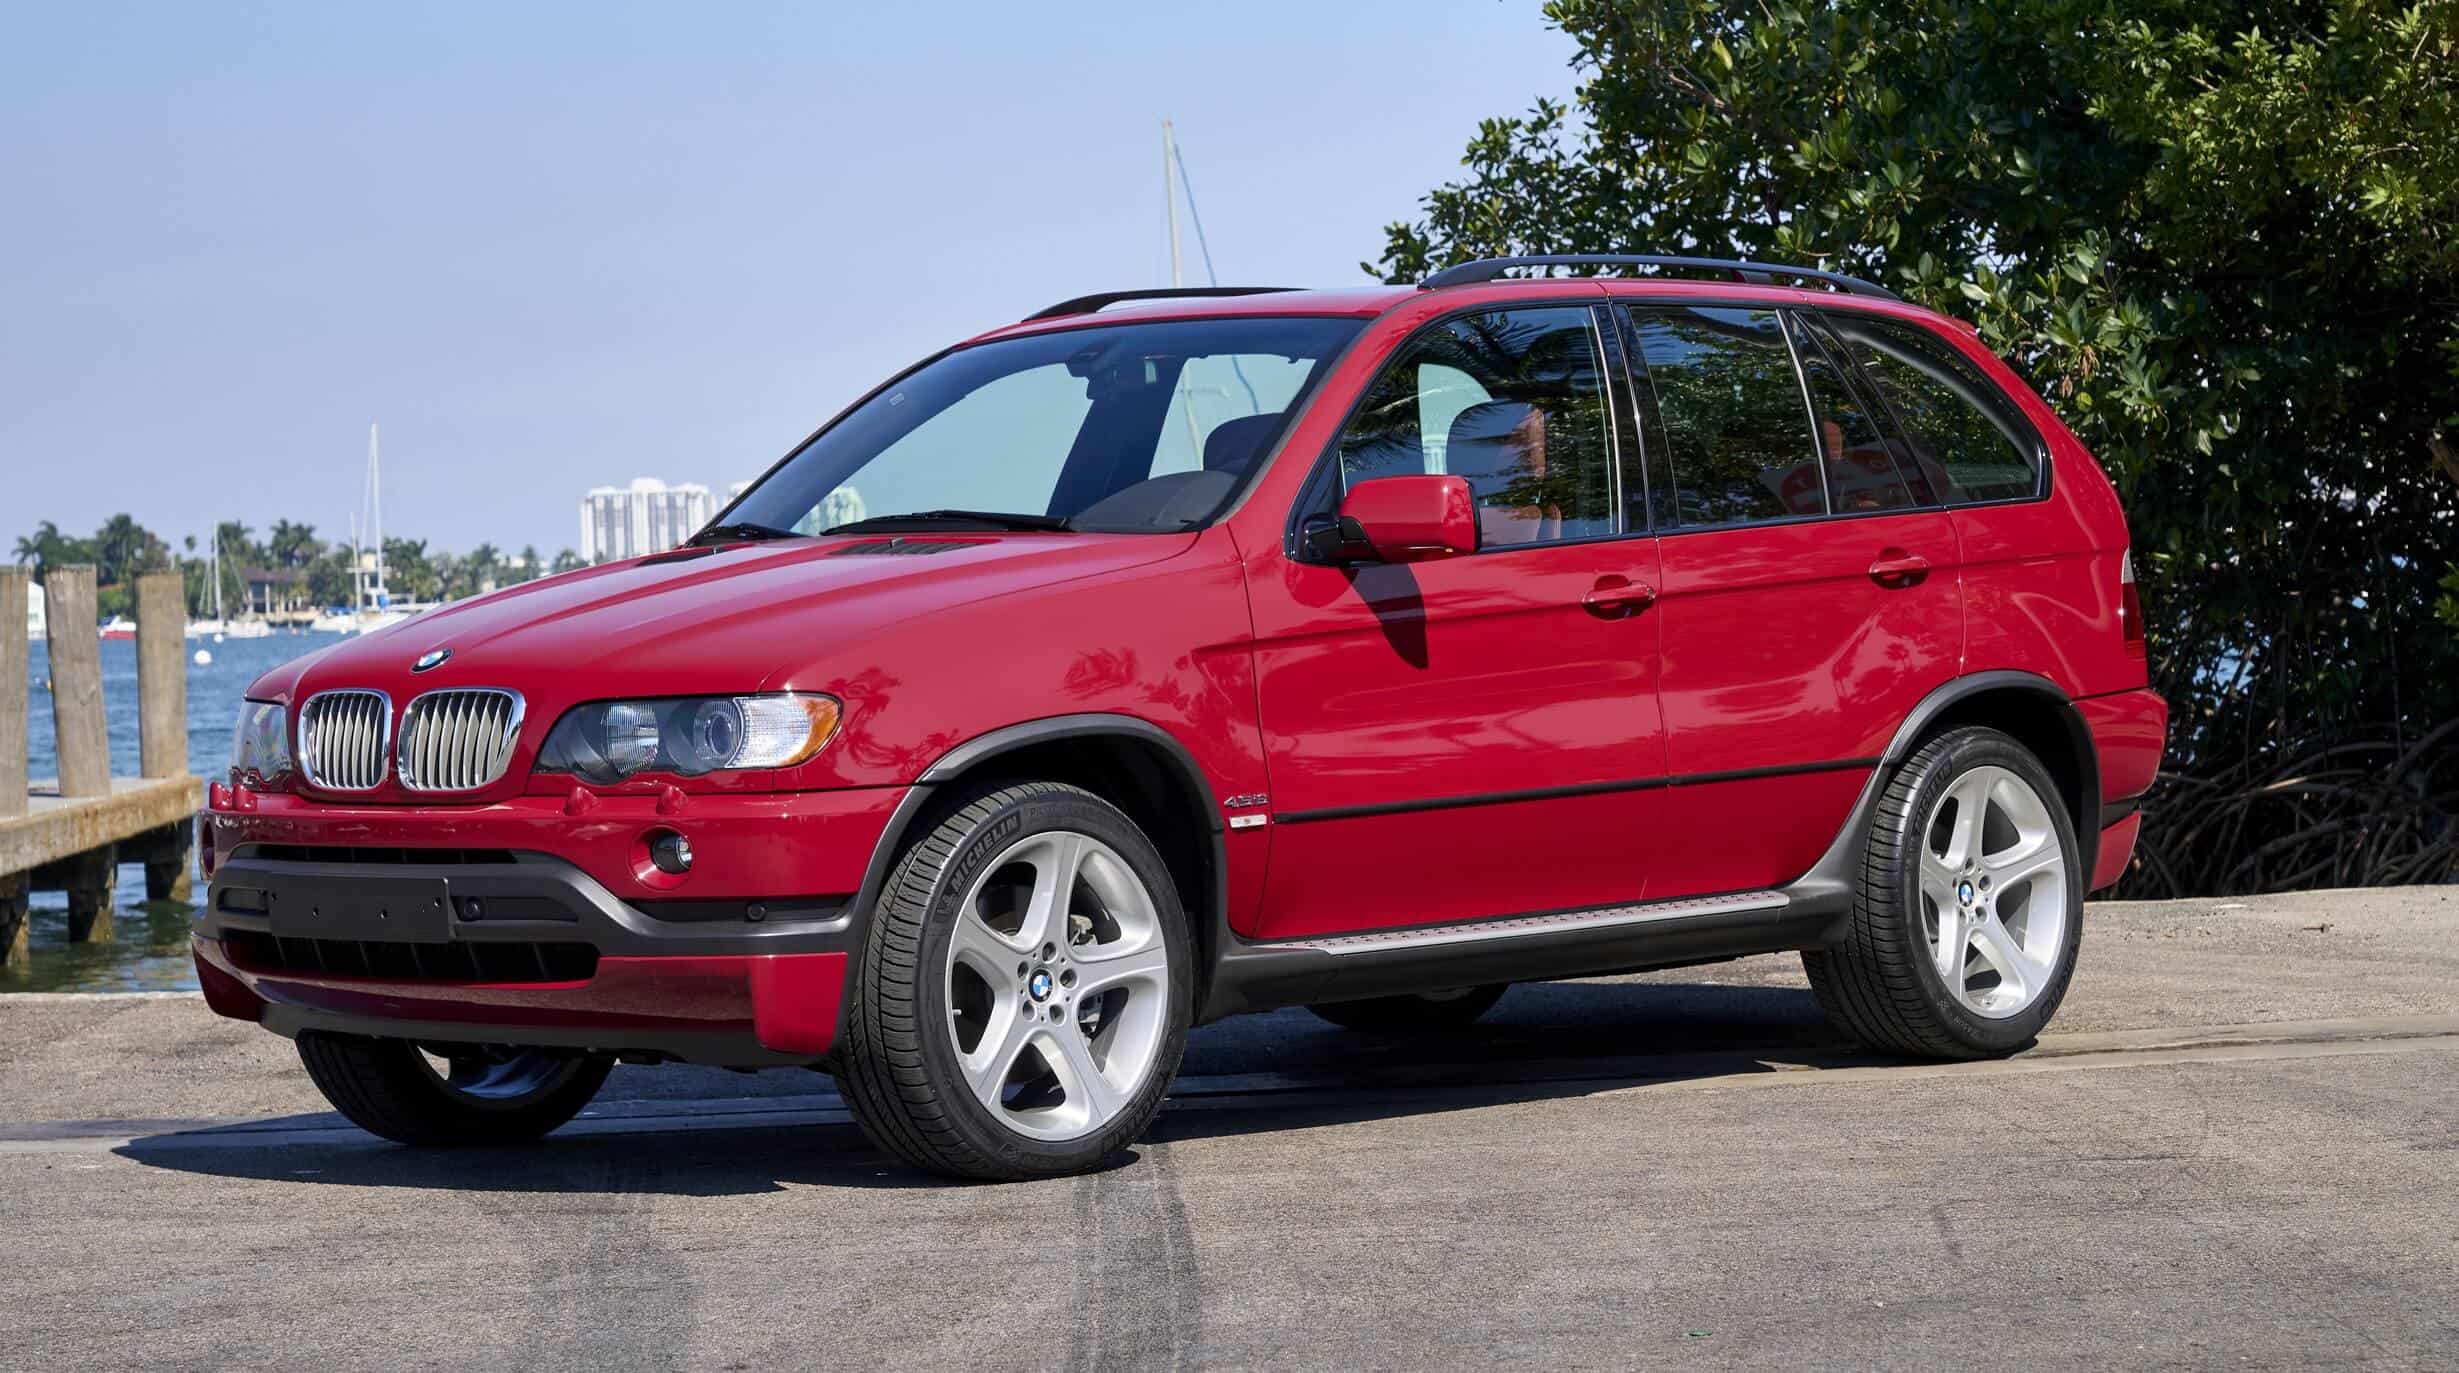 2003 BMW X5 4.6is Imola Red Photo Shoot Is A V8 Blast From The Past